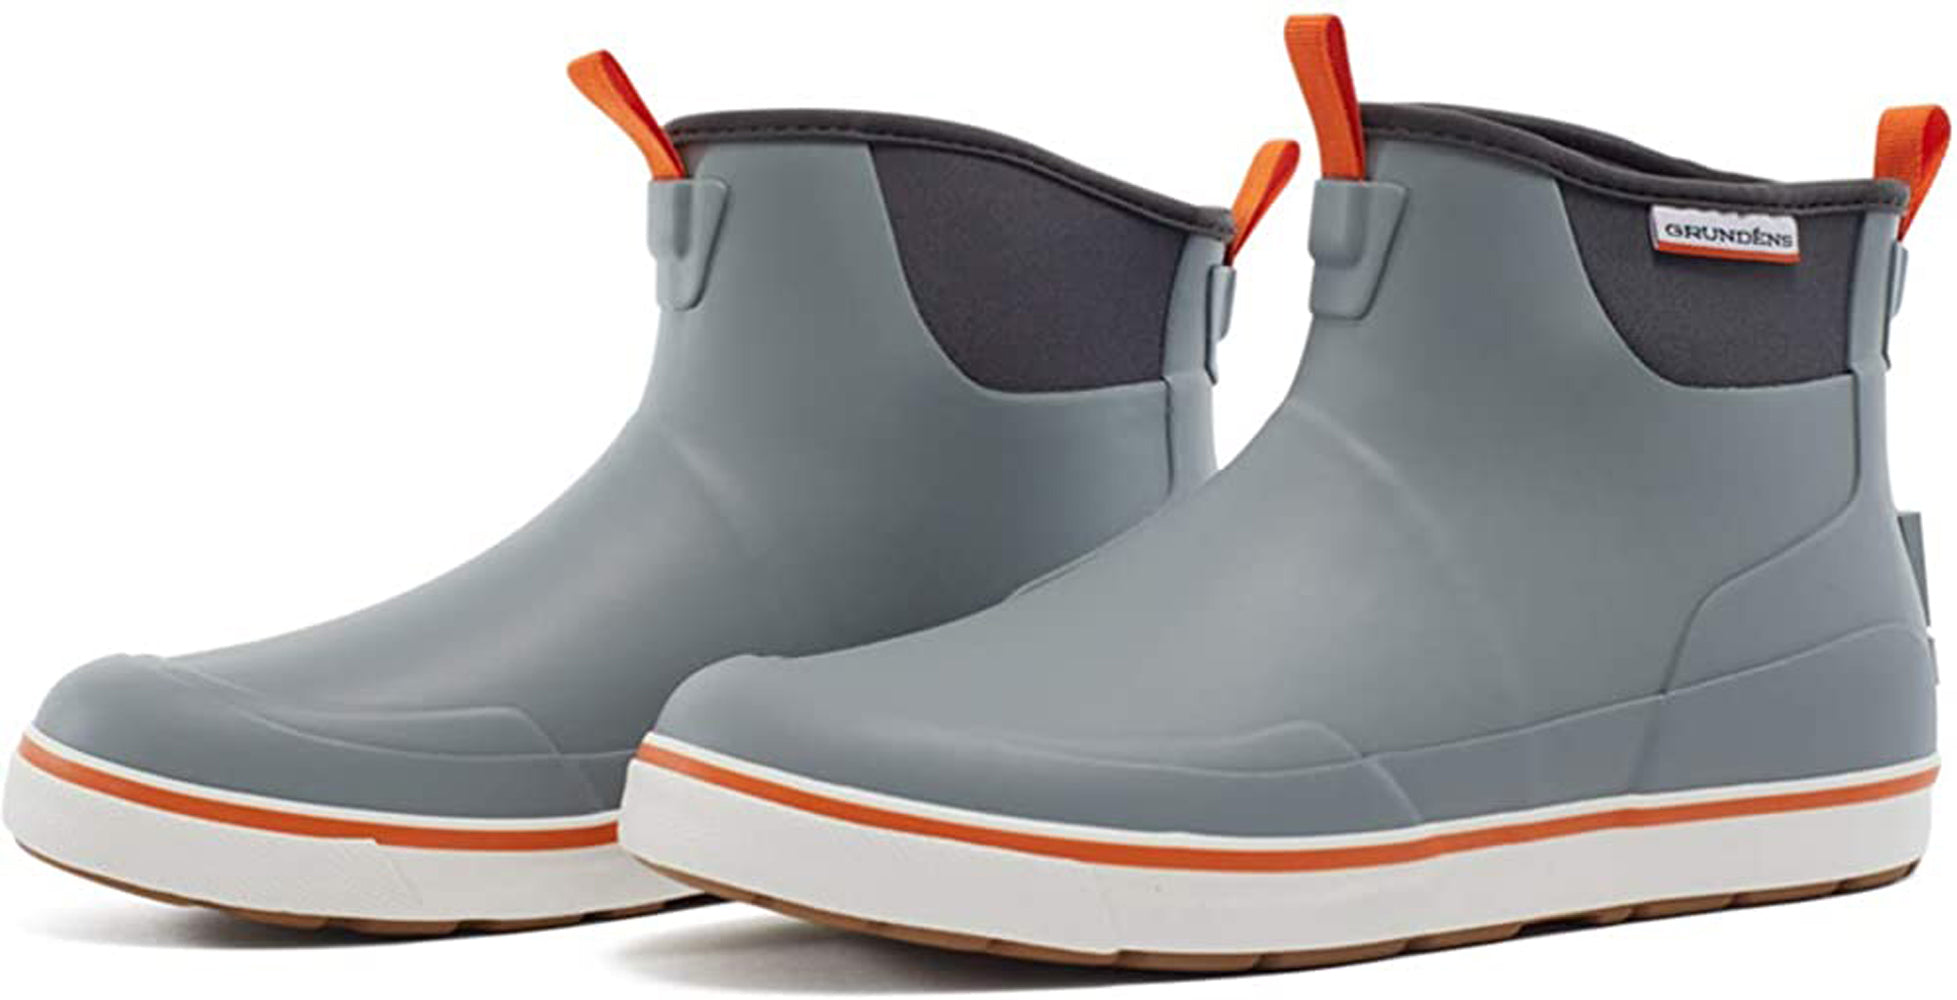 Deck-Boss Ankle Boot in Monument Grey color from the side view